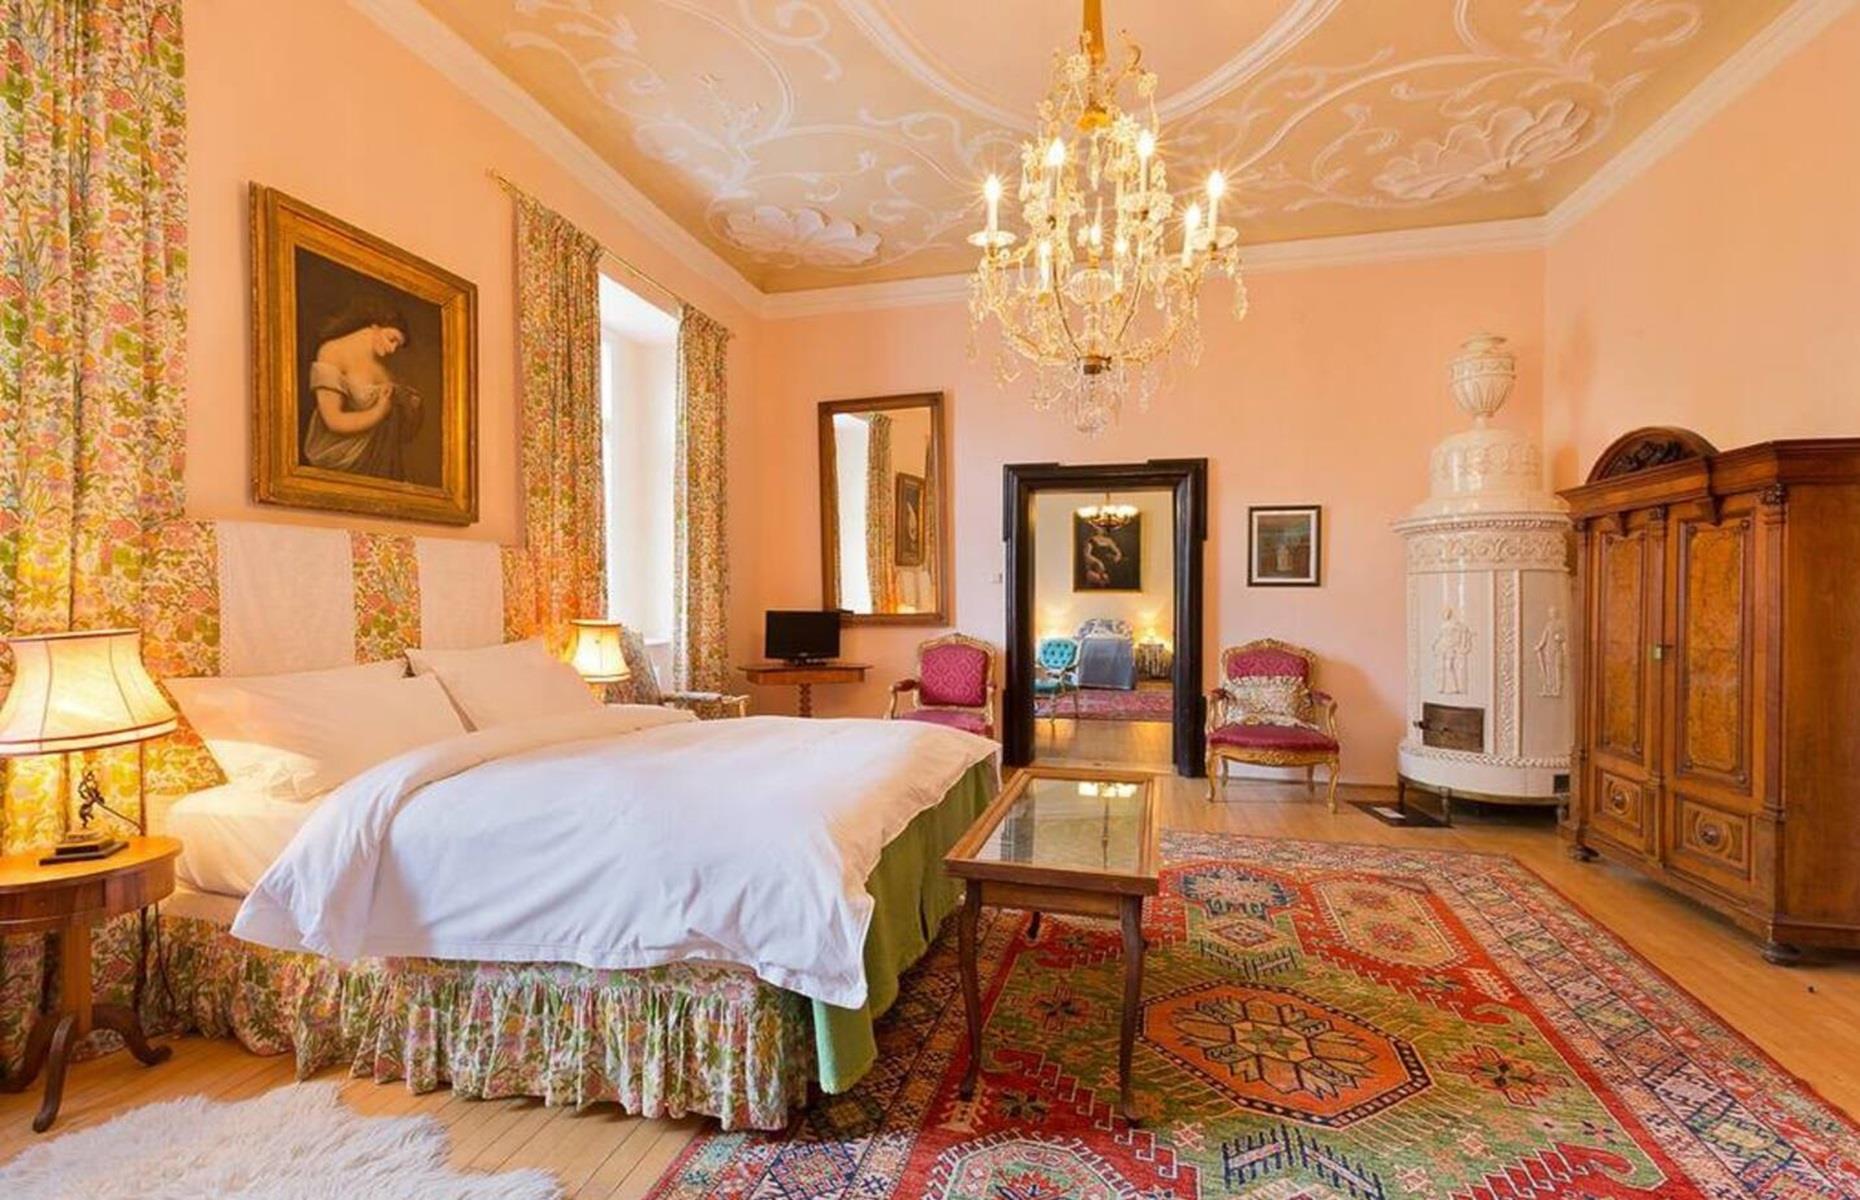 <p>Schloss Ernegg has belonged to the Auersperg family since 1656 and has been lovingly restored. Today, lucky guests can book their stay on <a href="https://www.airbnb.ae/rooms/41520745?adults=1&category_tag=Tag%3A8047&children=0&enable_m3_private_room=true&infants=0&pets=0&photo_id=948749138&search_mode=flex_destinations_search&check_in=2024-06-02&check_out=2024-06-07&source_impression_id=p3_1716369085_vhNOKCPEvbNua75s&previous_page_section_name=1000&federated_search_id=2e254ff2-3d5f-420d-af8d-3f710b1c06d4">Airbnb</a>.</p>  <p>It can also be hired for weddings and events. Sprawling as well as stunning, the castle can accommodate 50 people at any one time and there are several cottages on-site, too, all located within walking distance of the castle's front door.</p>